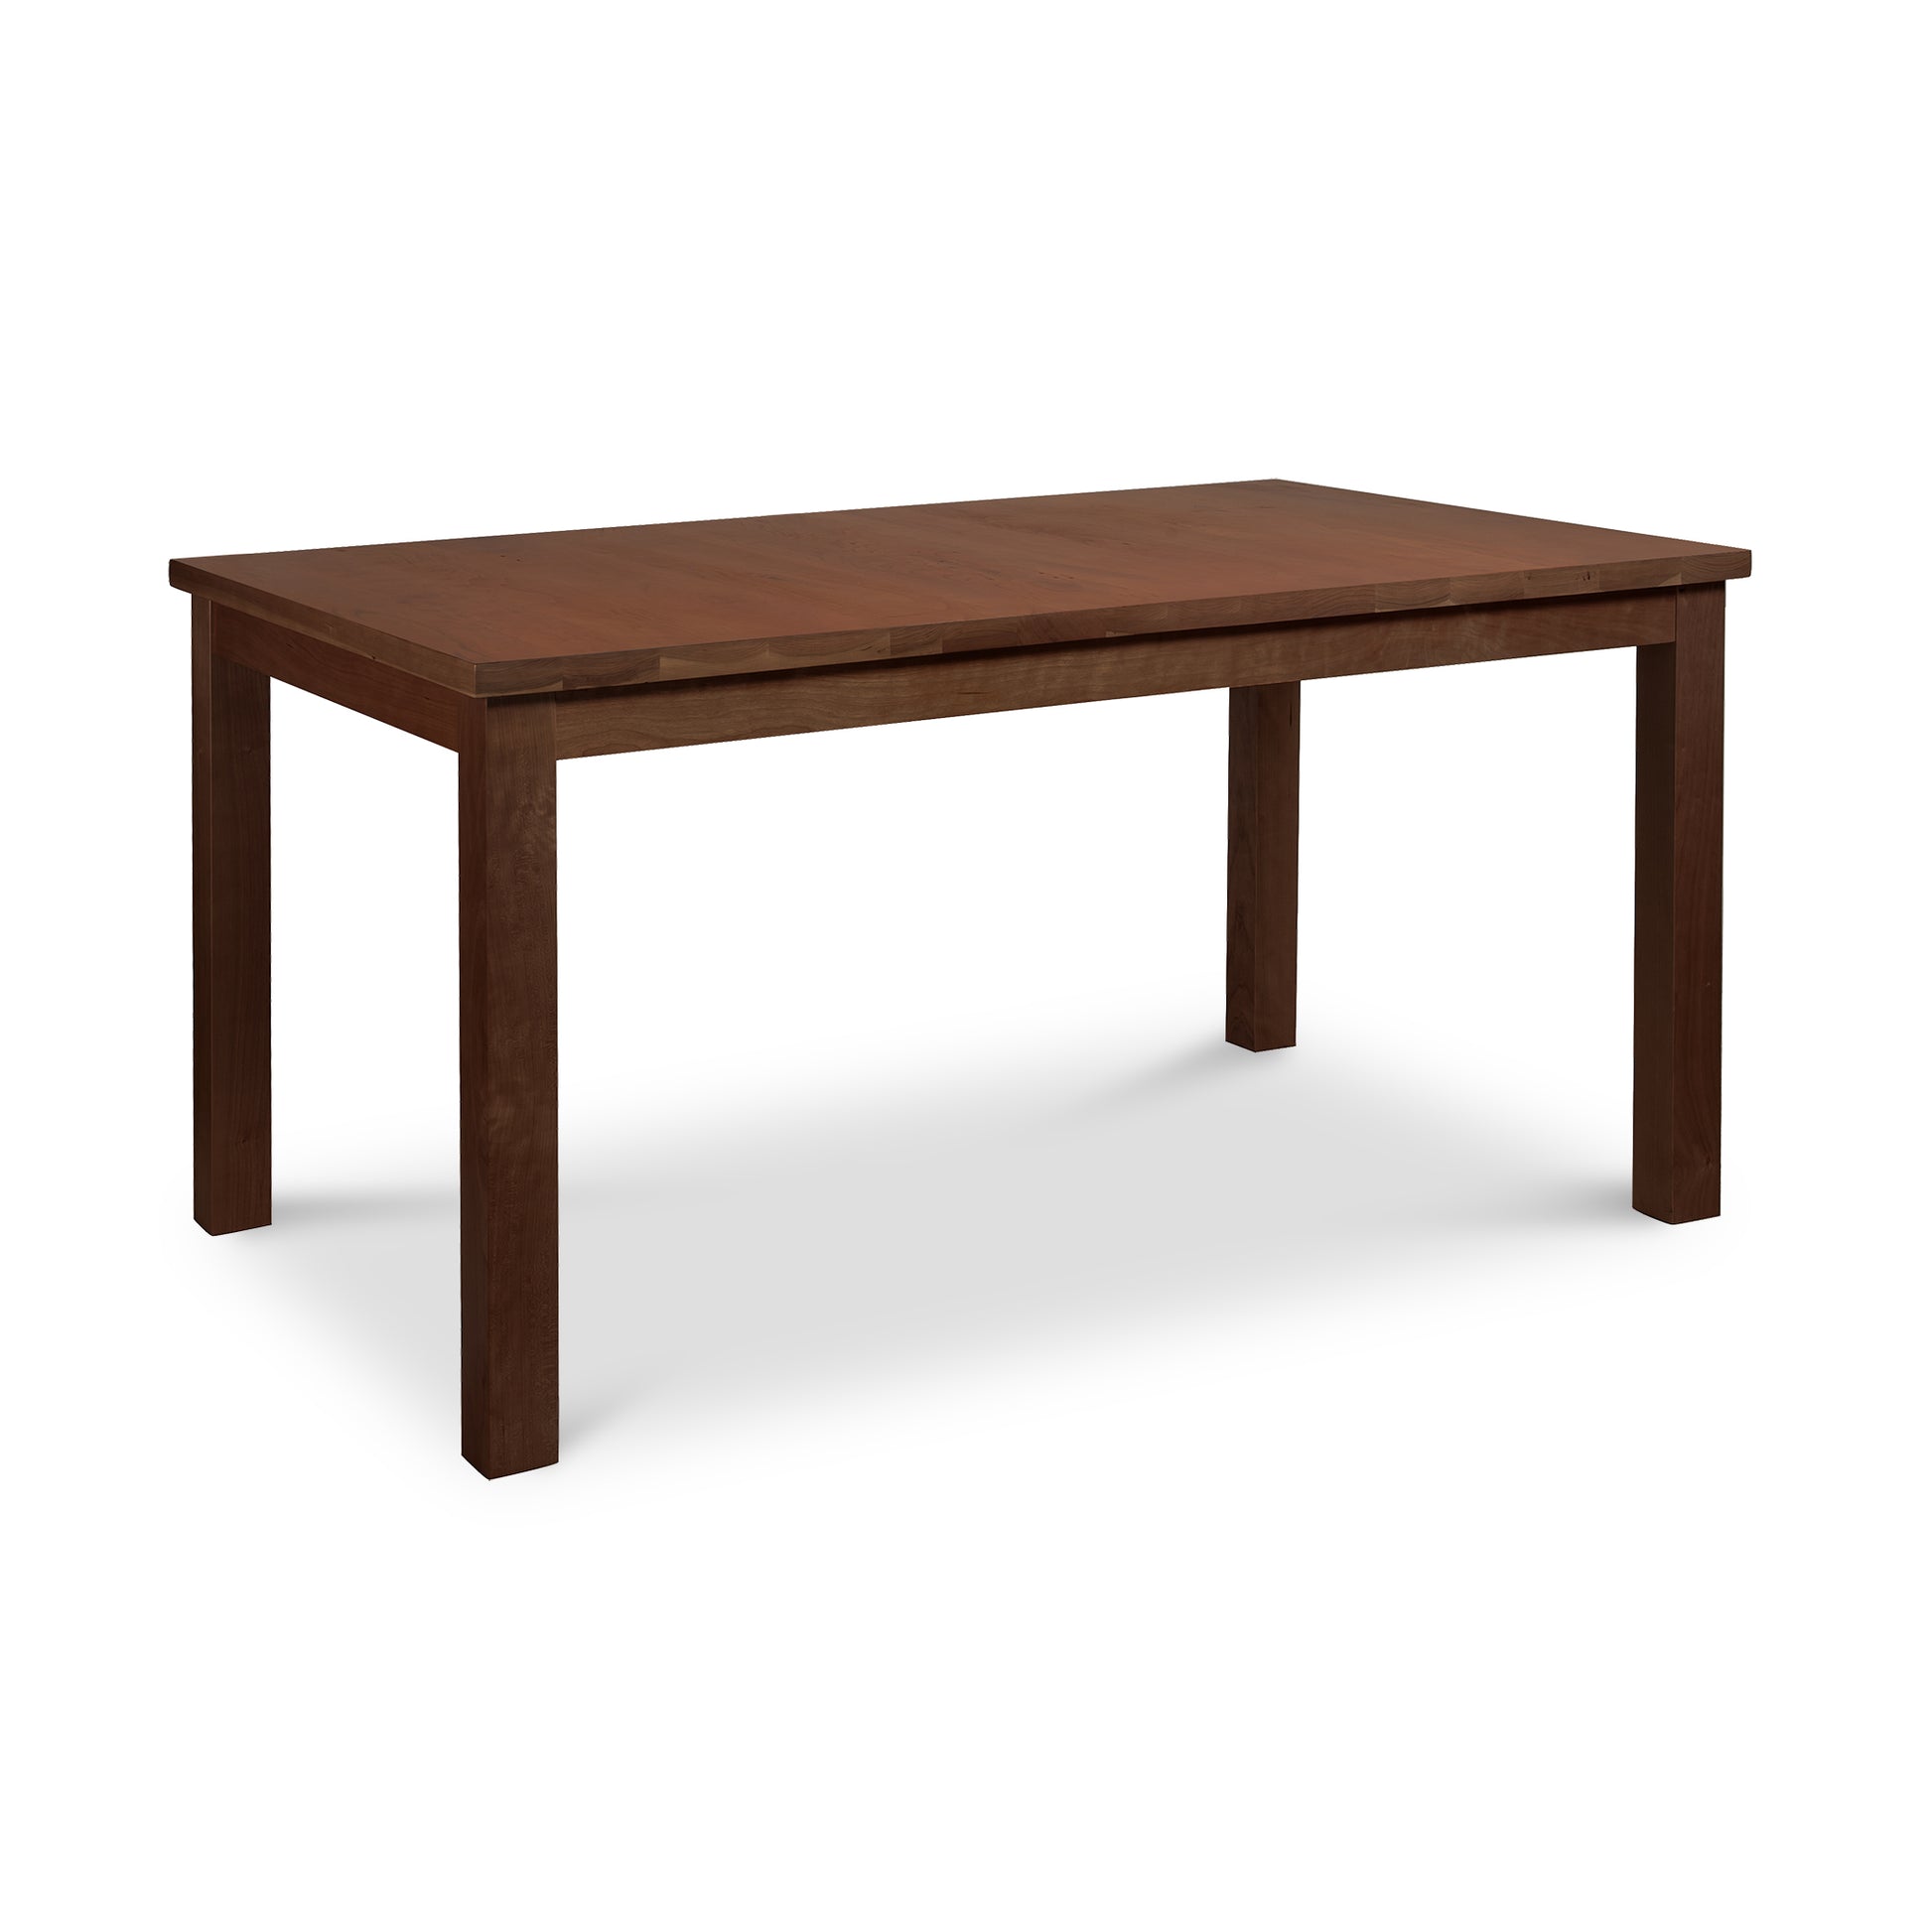 A Modern Mission Parsons Solid Top Table with a sustainable harvested wooden top by Lyndon Furniture.